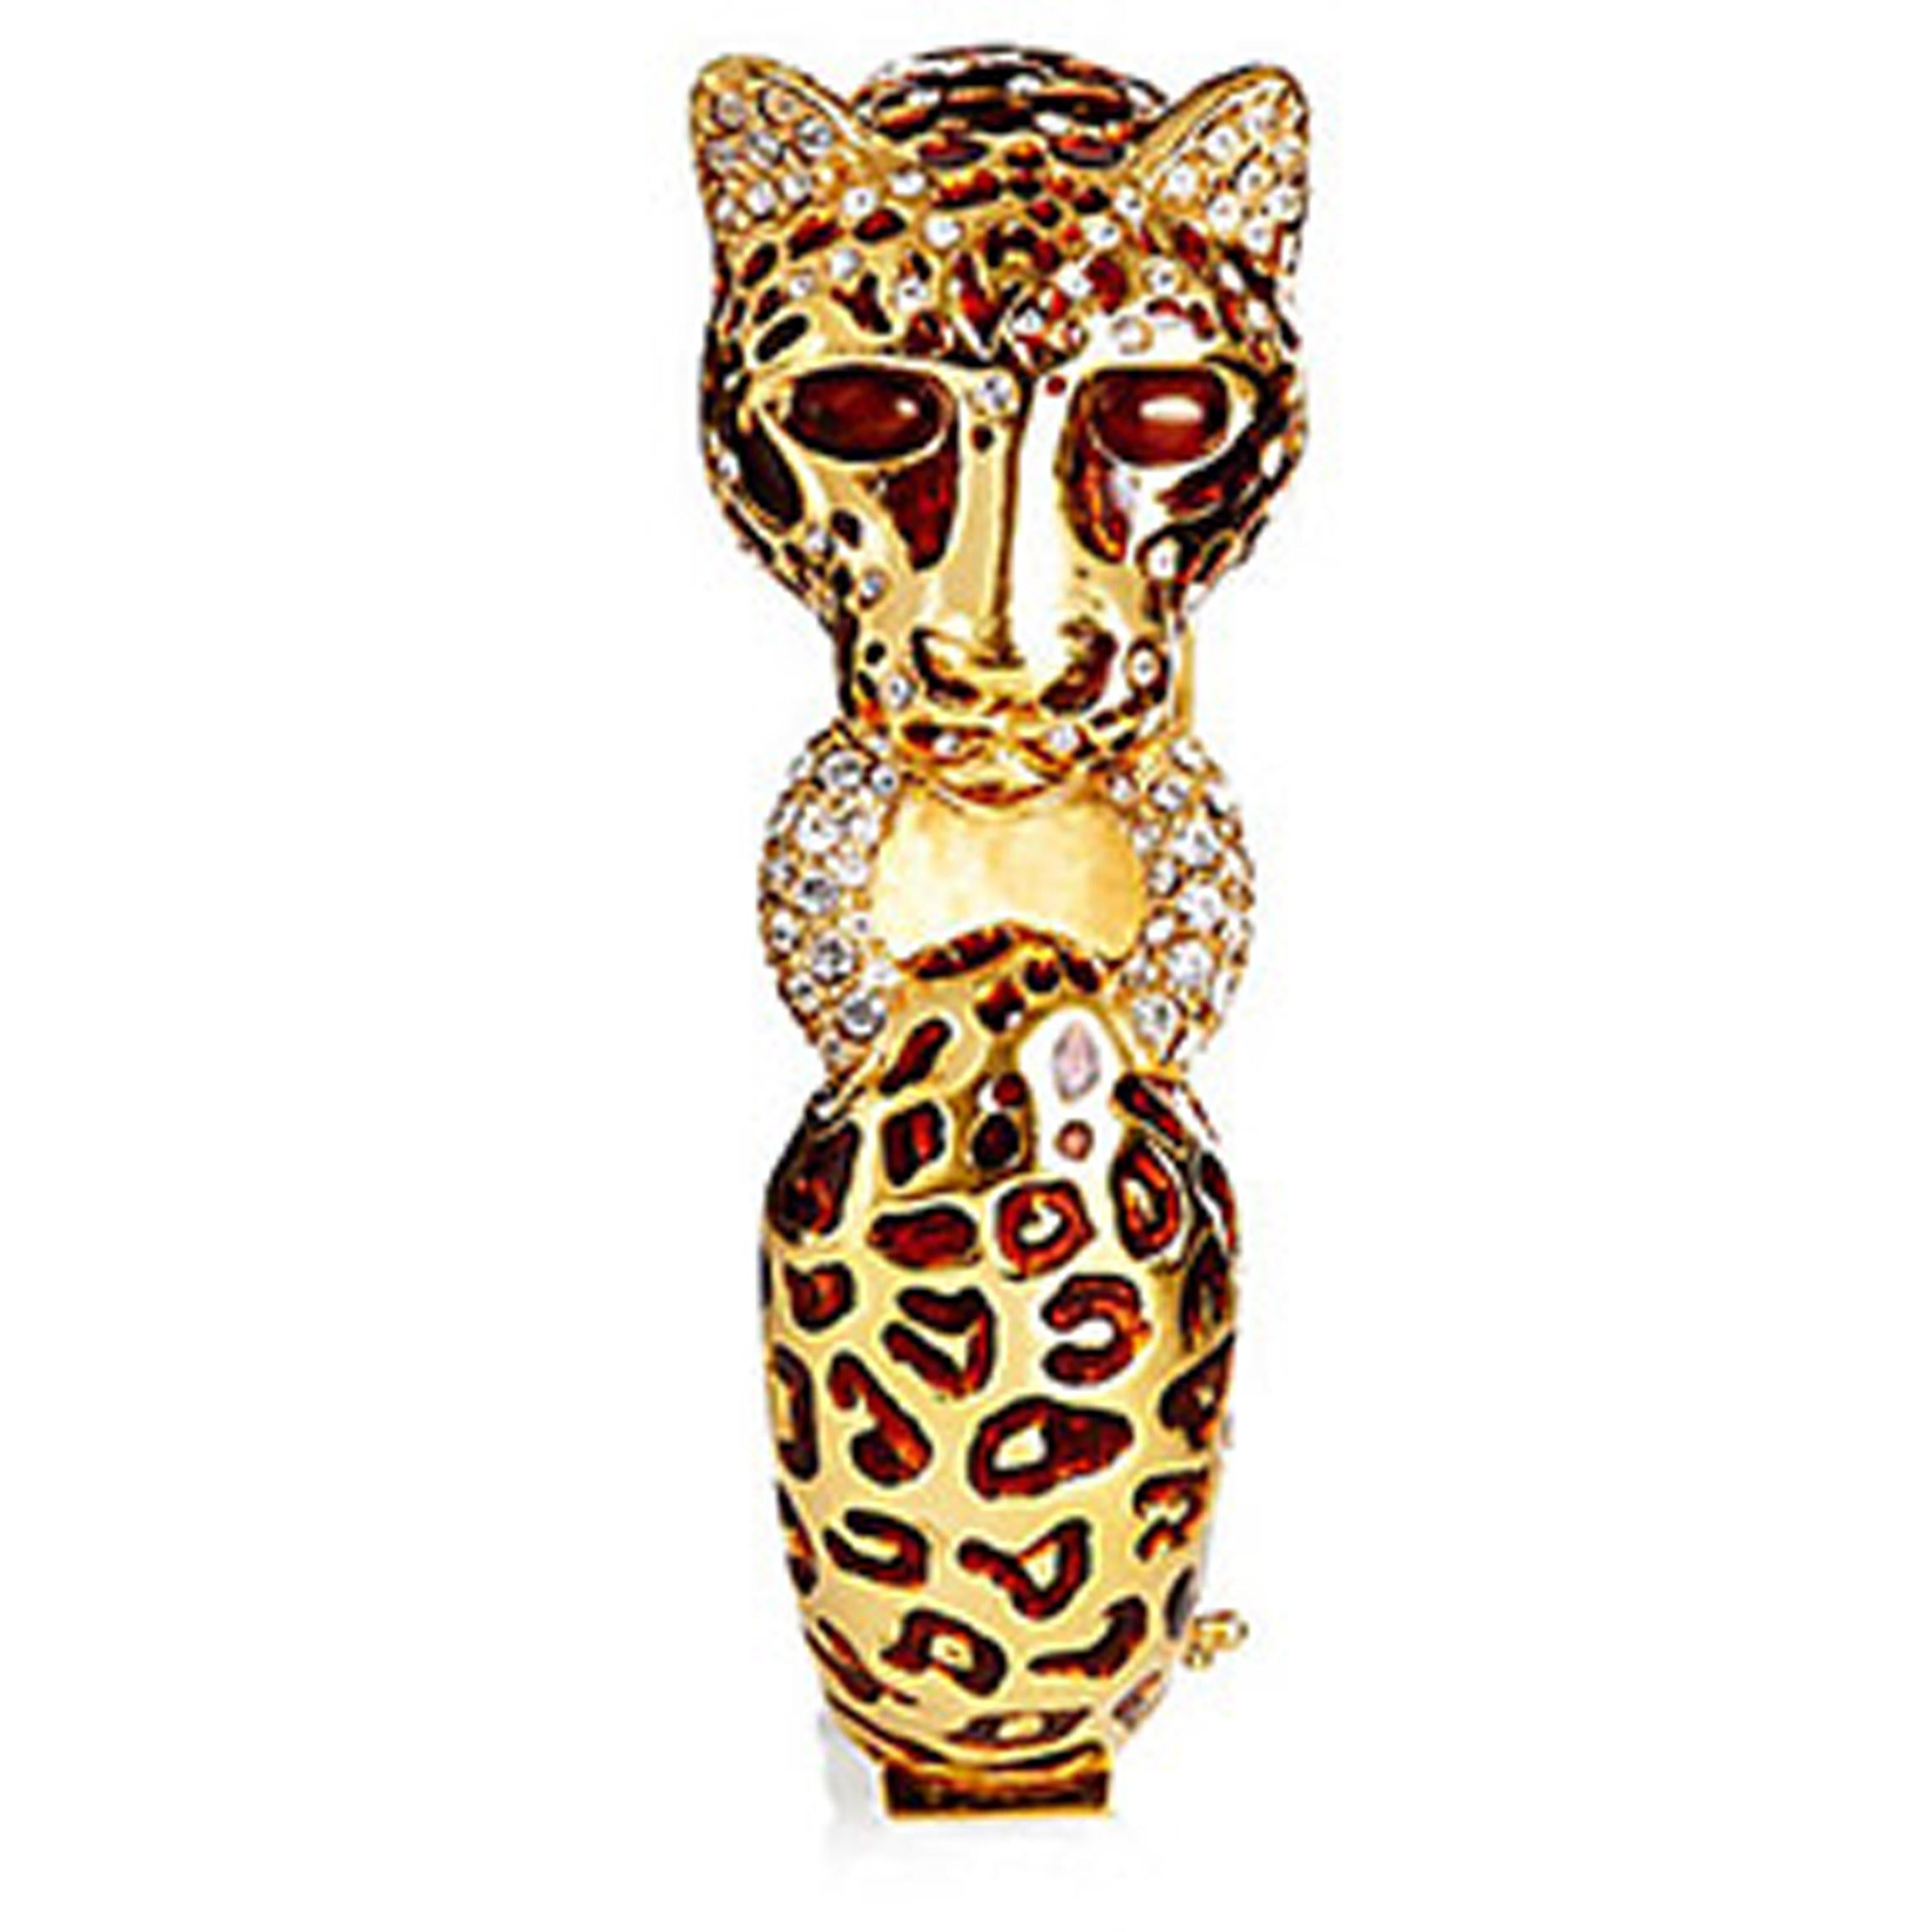 The CINER Cheetah Animal Bracelet is a fierce addition to your jewelry collection.

PLEASE NOTE: The pieces available are not vintage and are not reproductions.
CINER uses original models to produce our jewelry today. 
*If you would like to custom